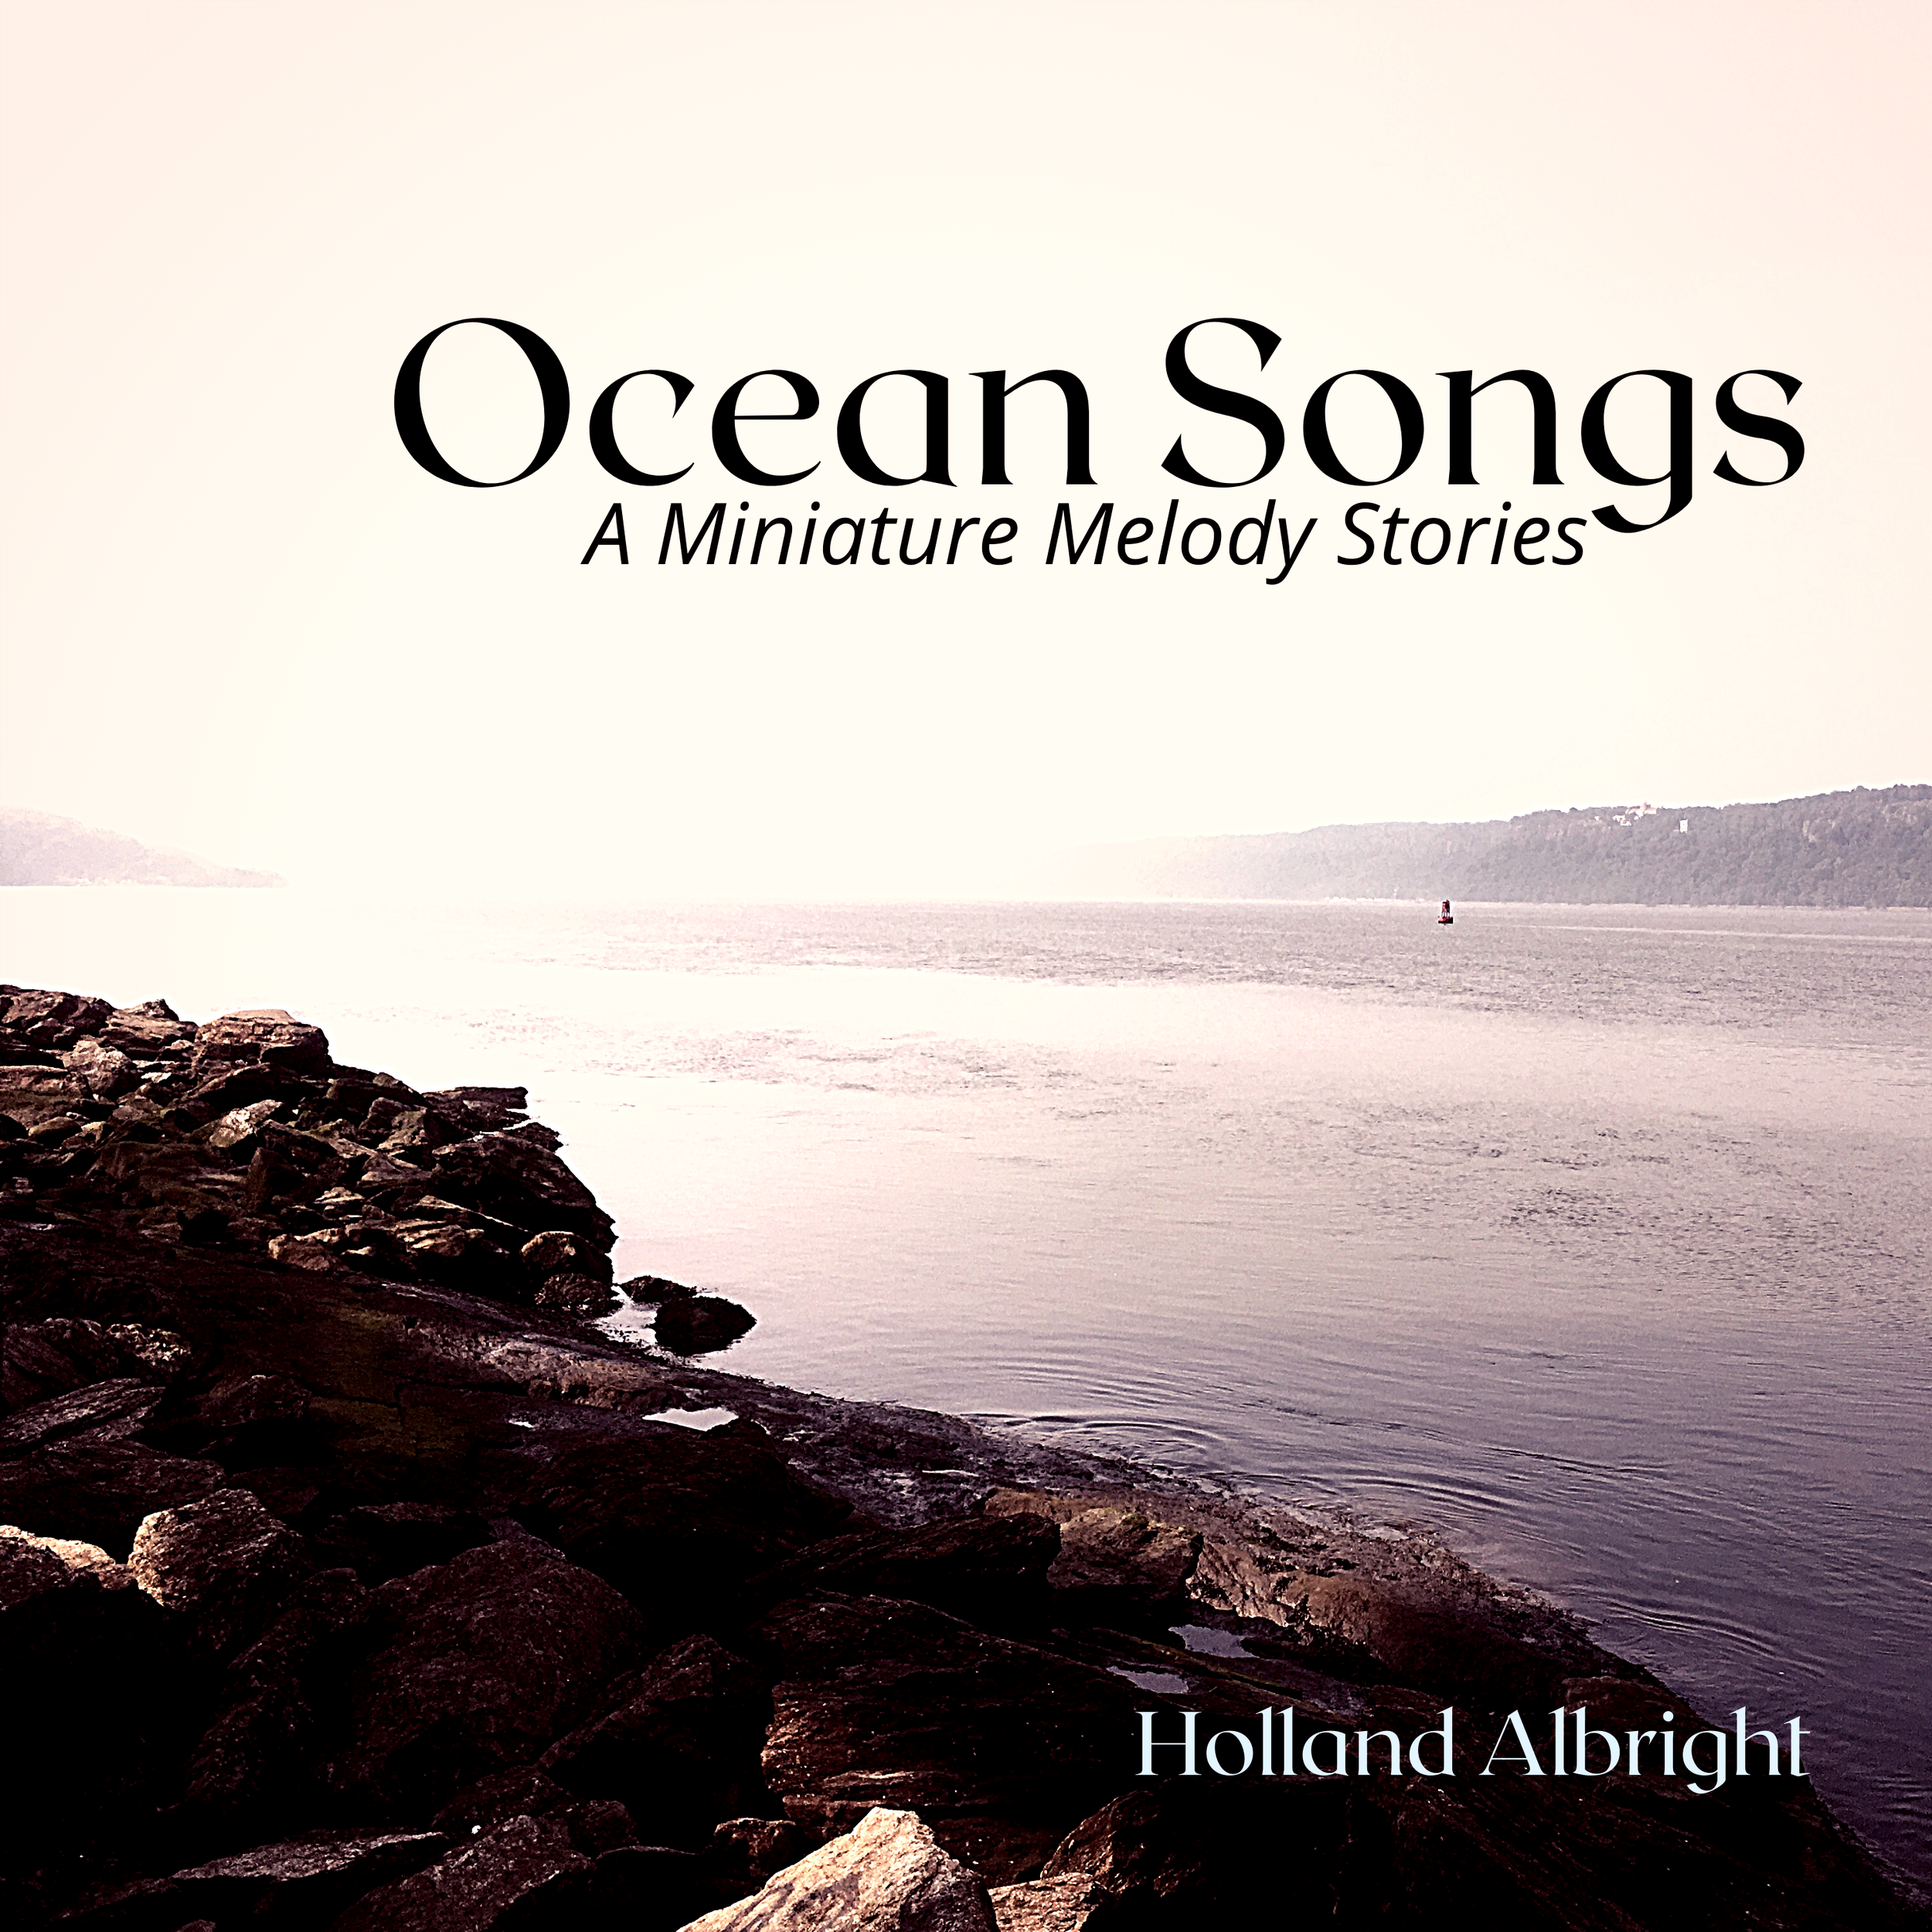 Ocean Songs: A Miniature Melody Stories